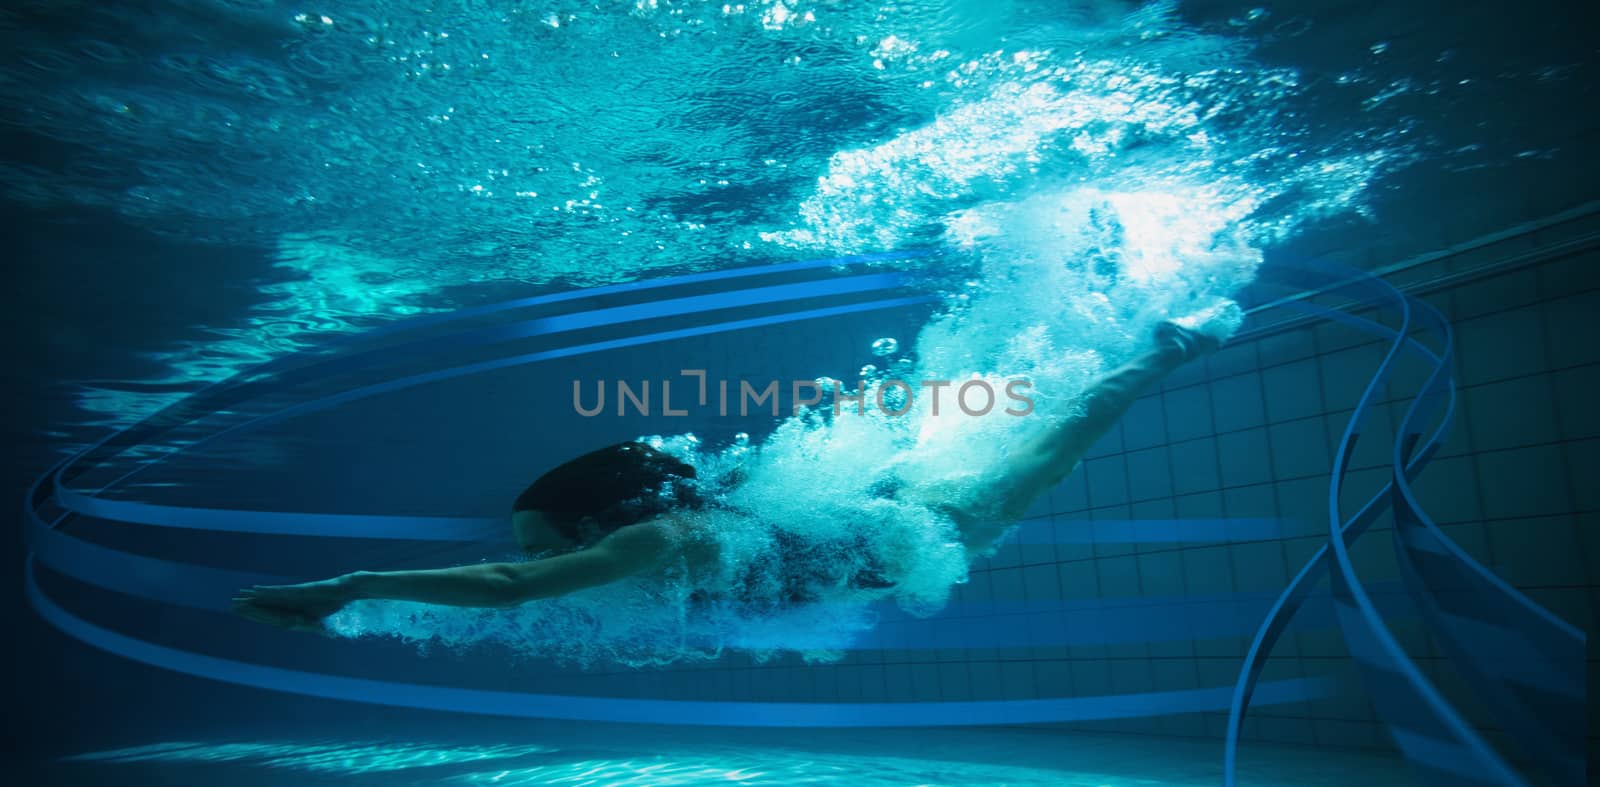 Athletic swimmer smiling at camera underwater against feet of woman standing on the edge of the pool